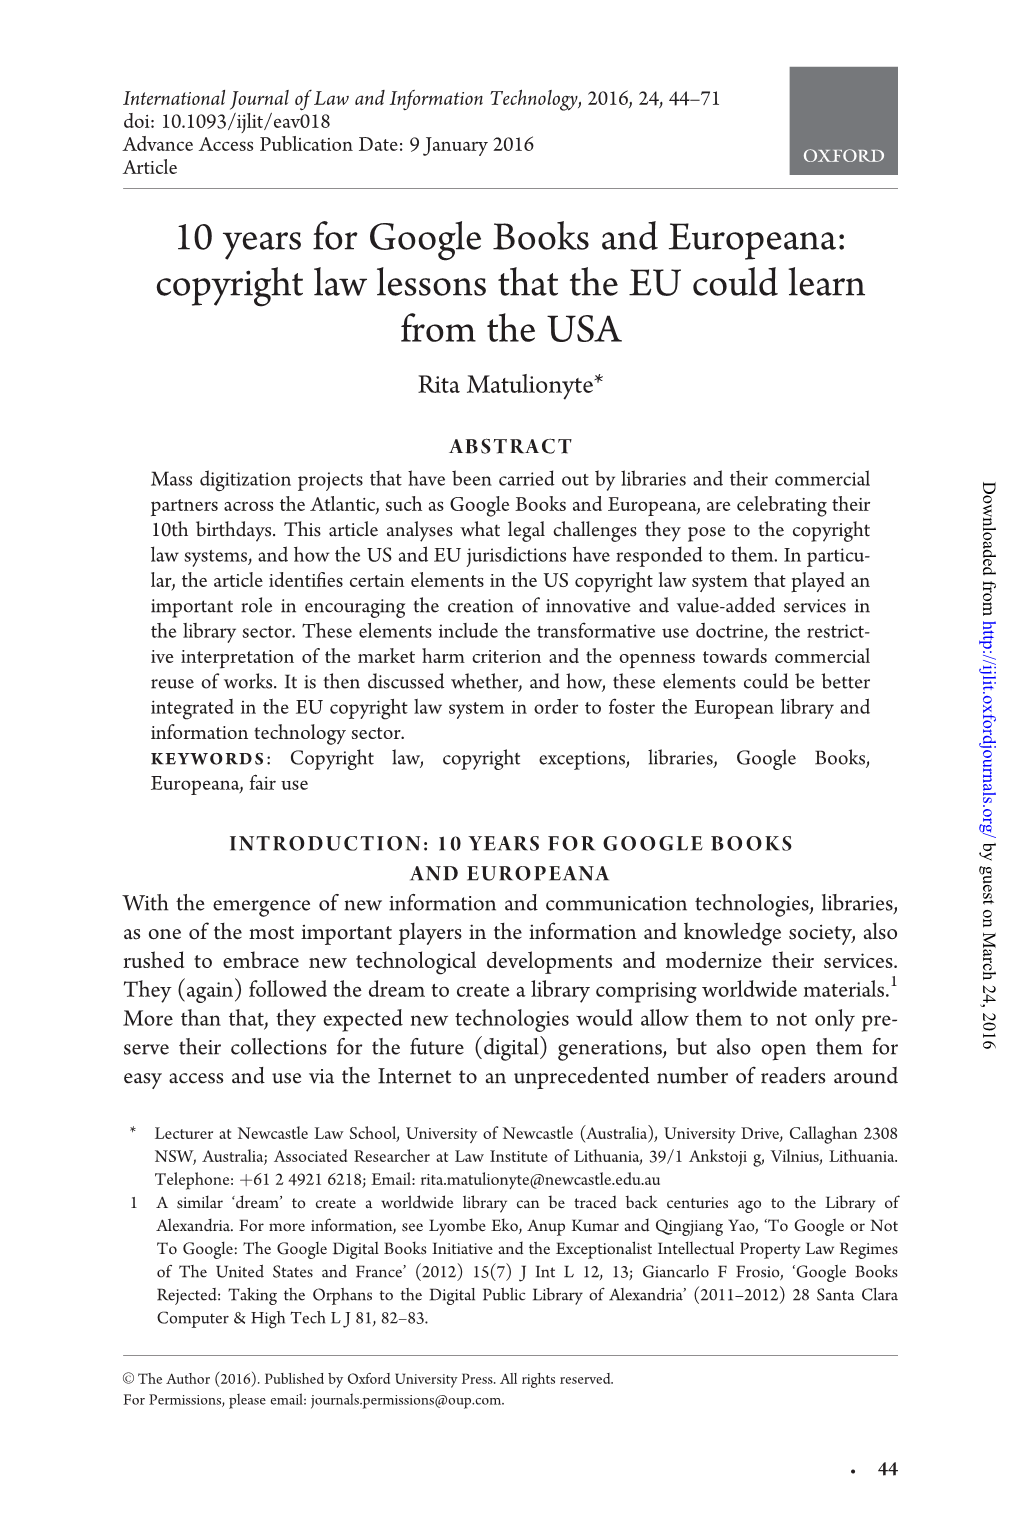 10 Years for Google Books and Europeana: Copyright Law Lessons That the EU Could Learn from the USA Rita Matulionyte*